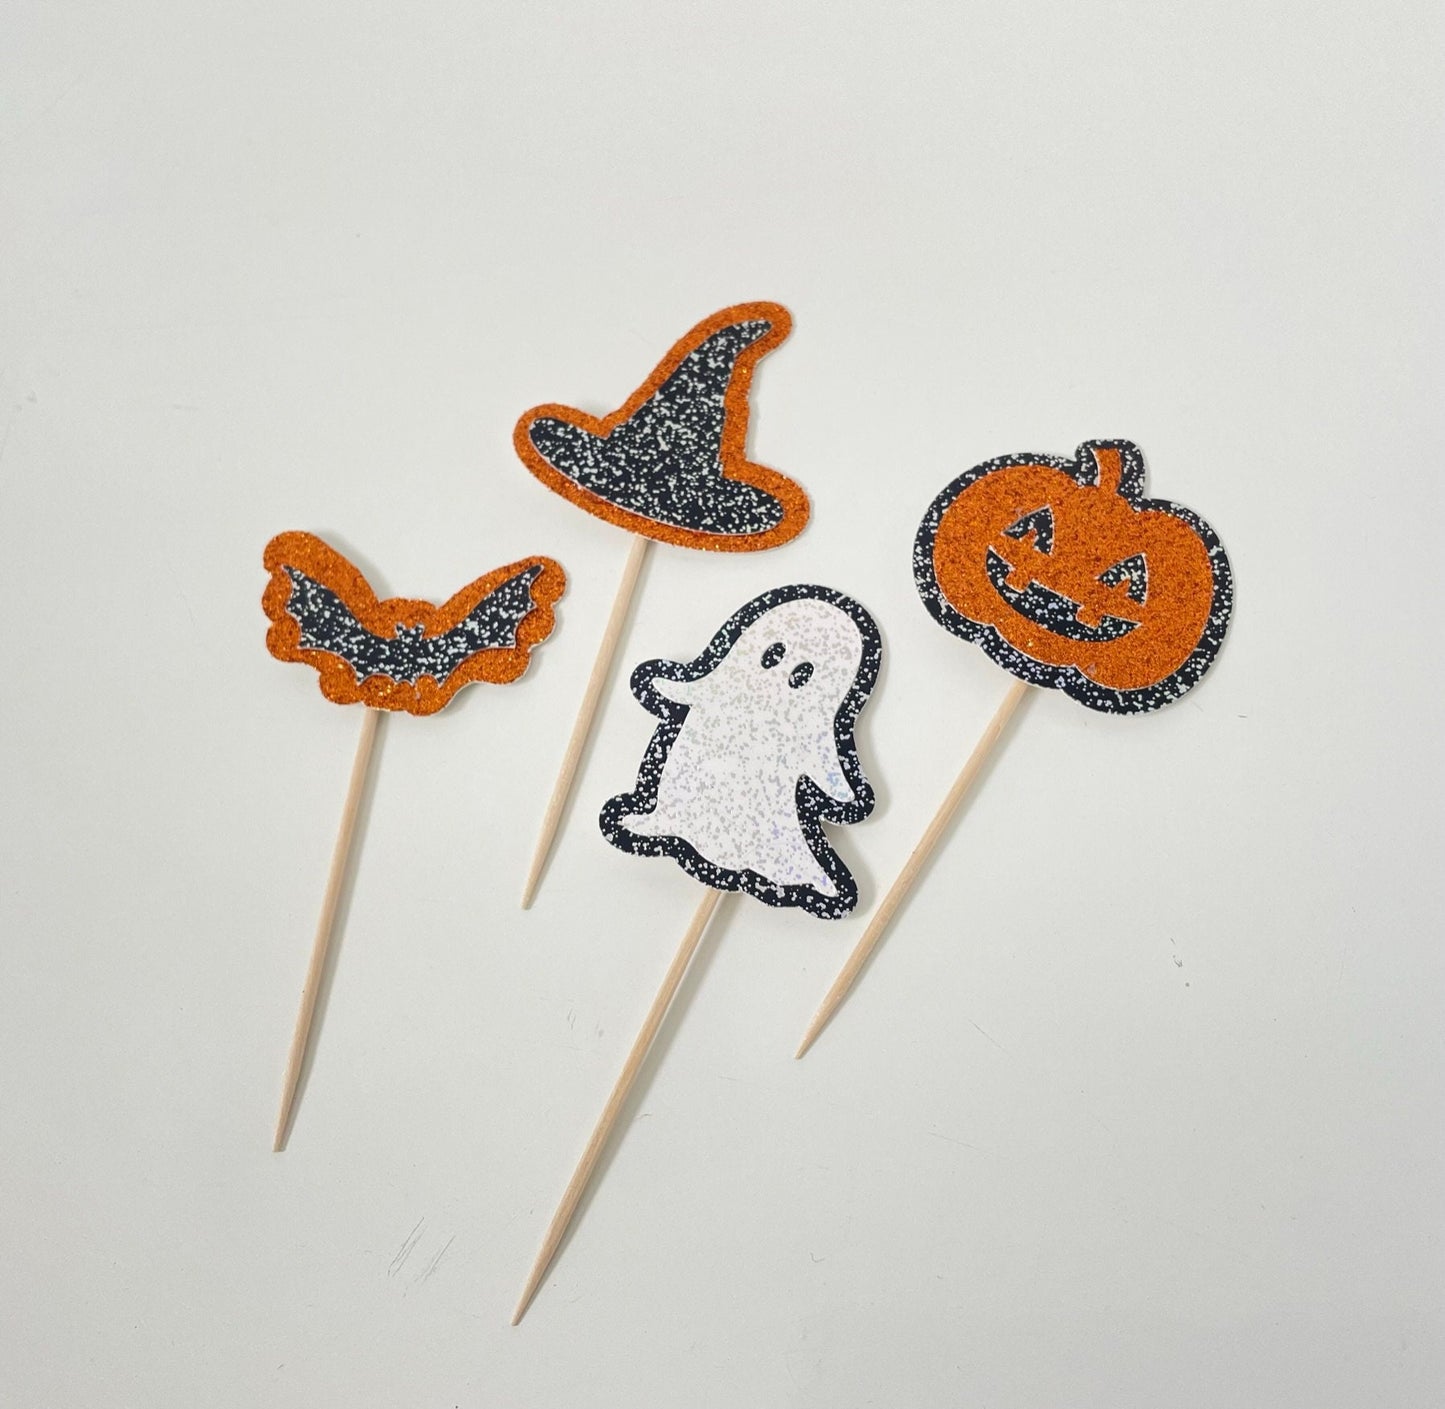 Set of 4 or 8 Halloween Cupcake Toppers, Spooky Party Fairy Cake Picks, Trick or Treat Kids Party Cake Decorations, Witch's Hat Cake Toppers